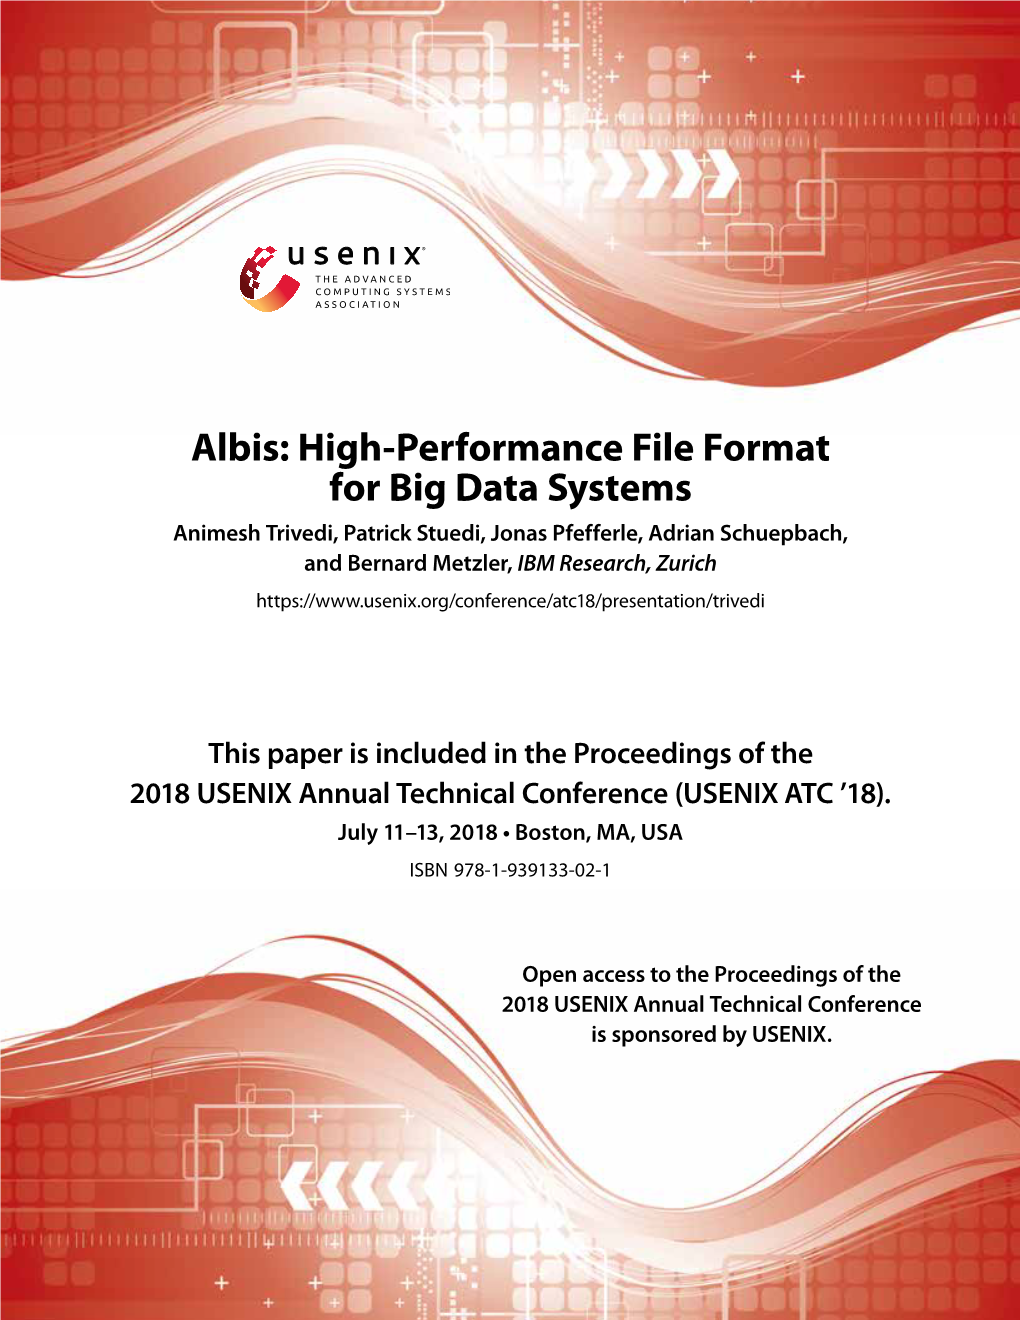 Albis: High-Performance File Format for Big Data Systems